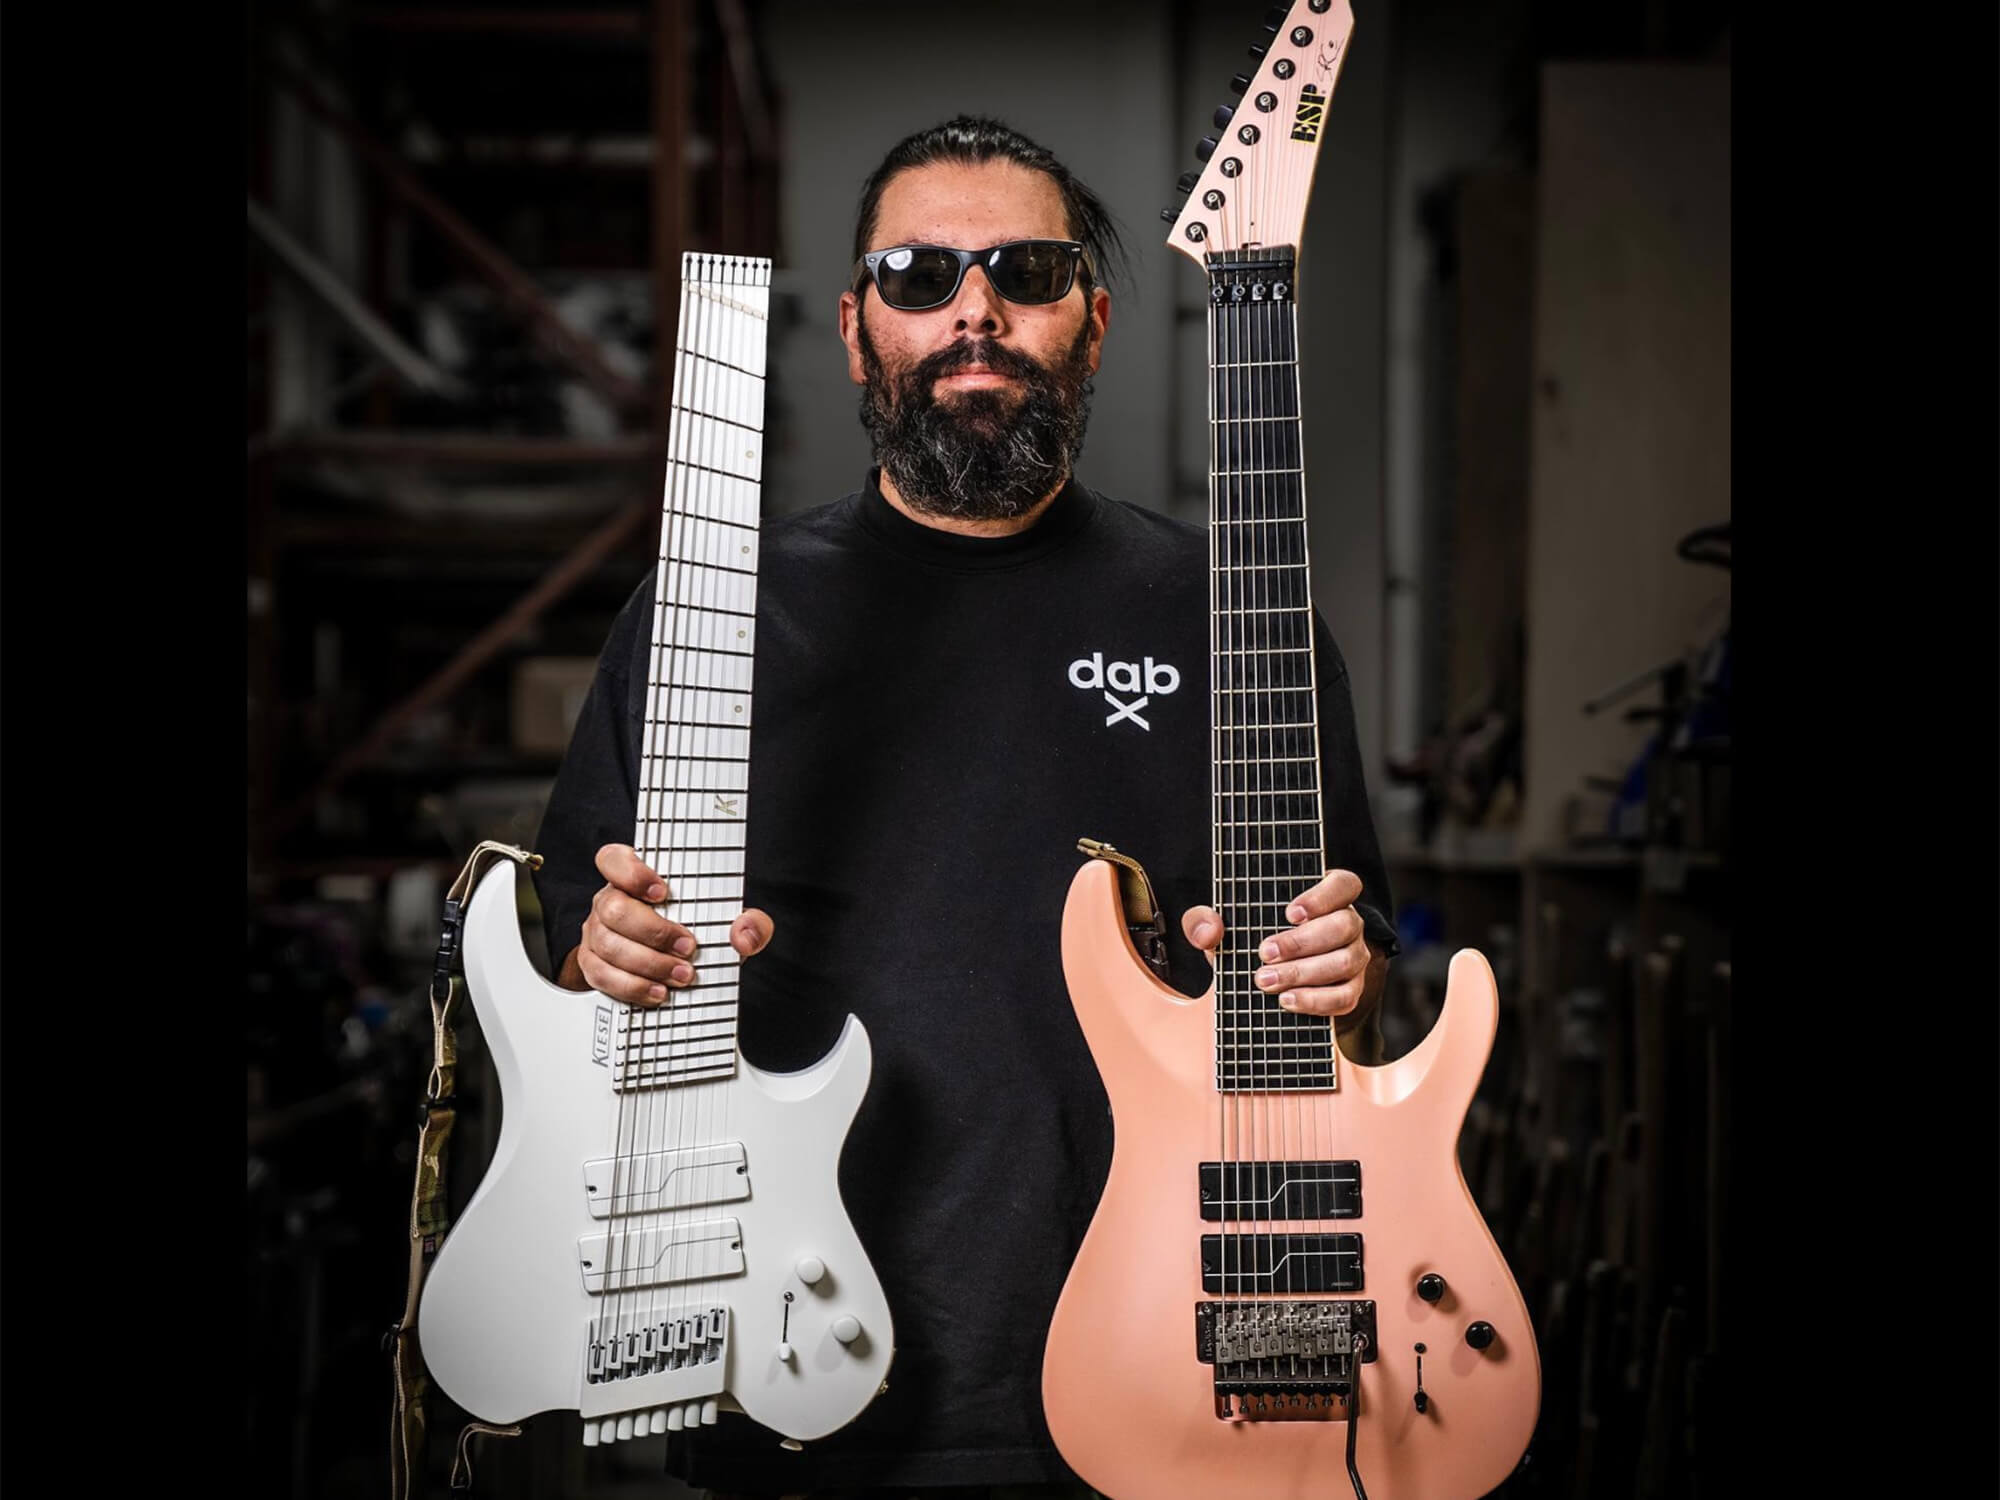 Stephen Carpenter holding two models - one from ESP, one from Kiesel